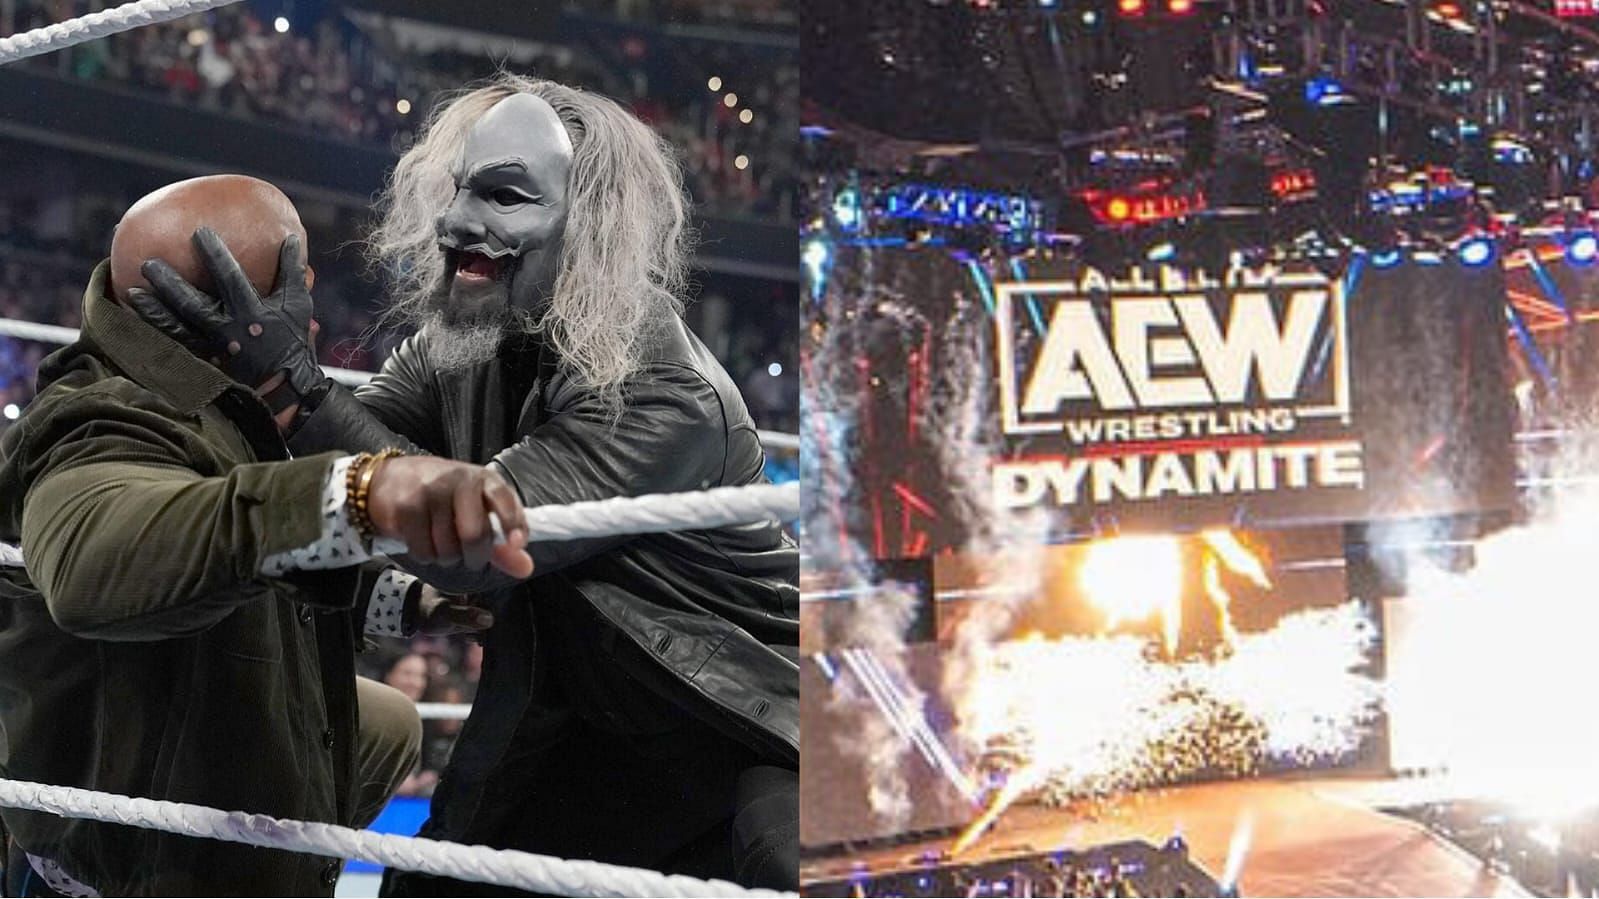 Uncle Howdy was a mysterious character associated with Bray Wyatt